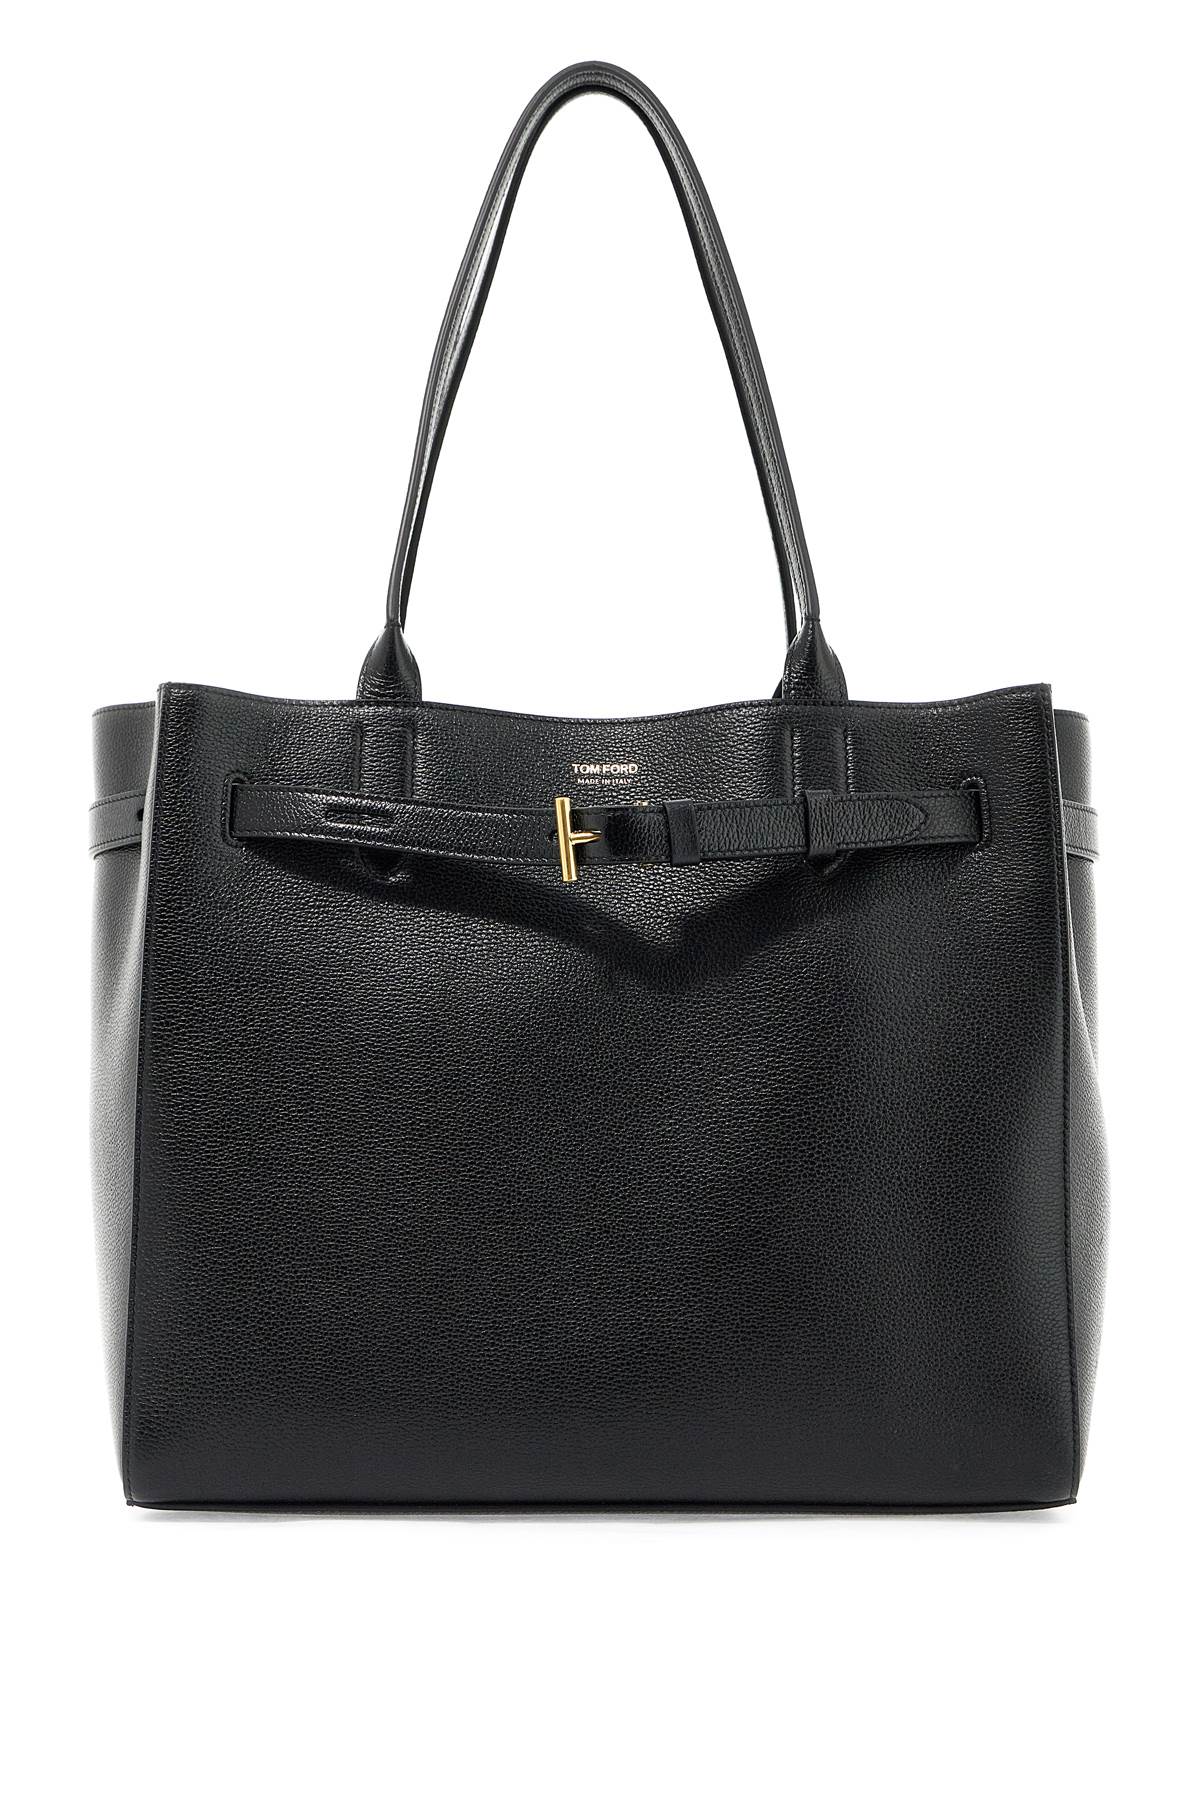 Tom Ford TOM FORD hammered leather tote bag